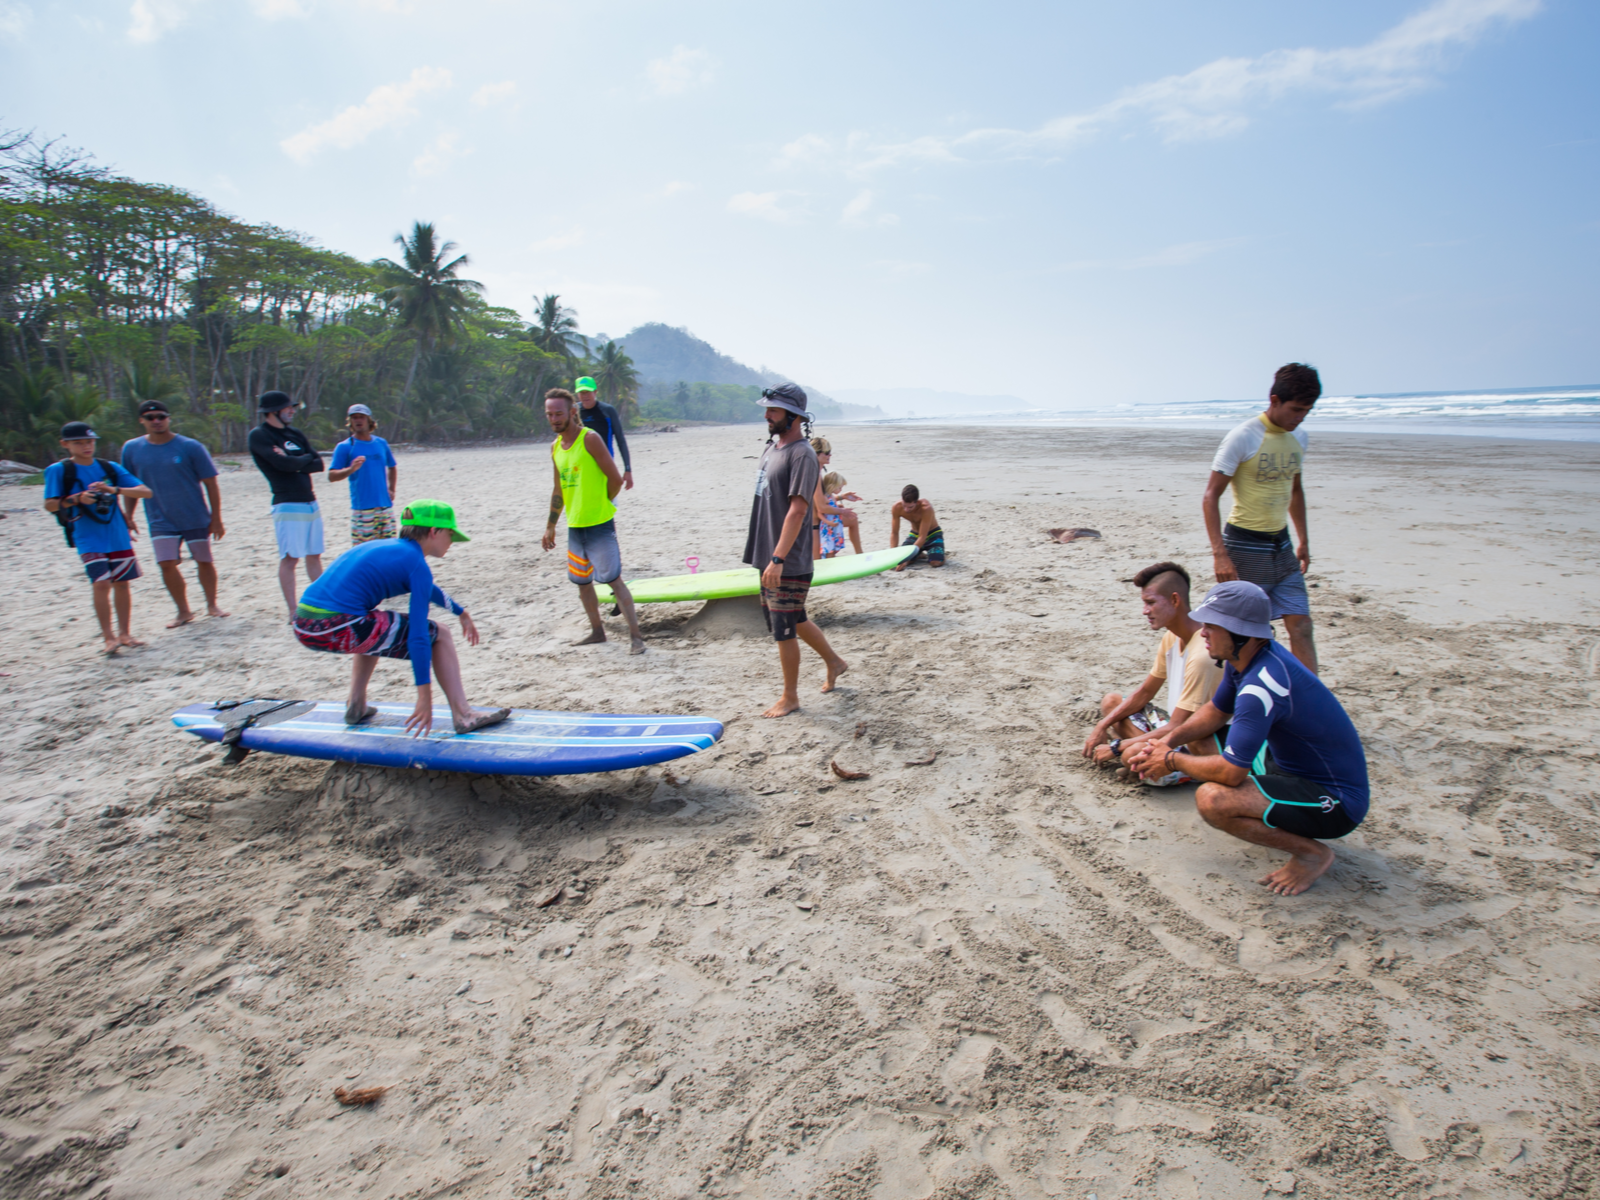 Tourists learning to surf at one of the best beaches in Costa Rica, Santa Teresa